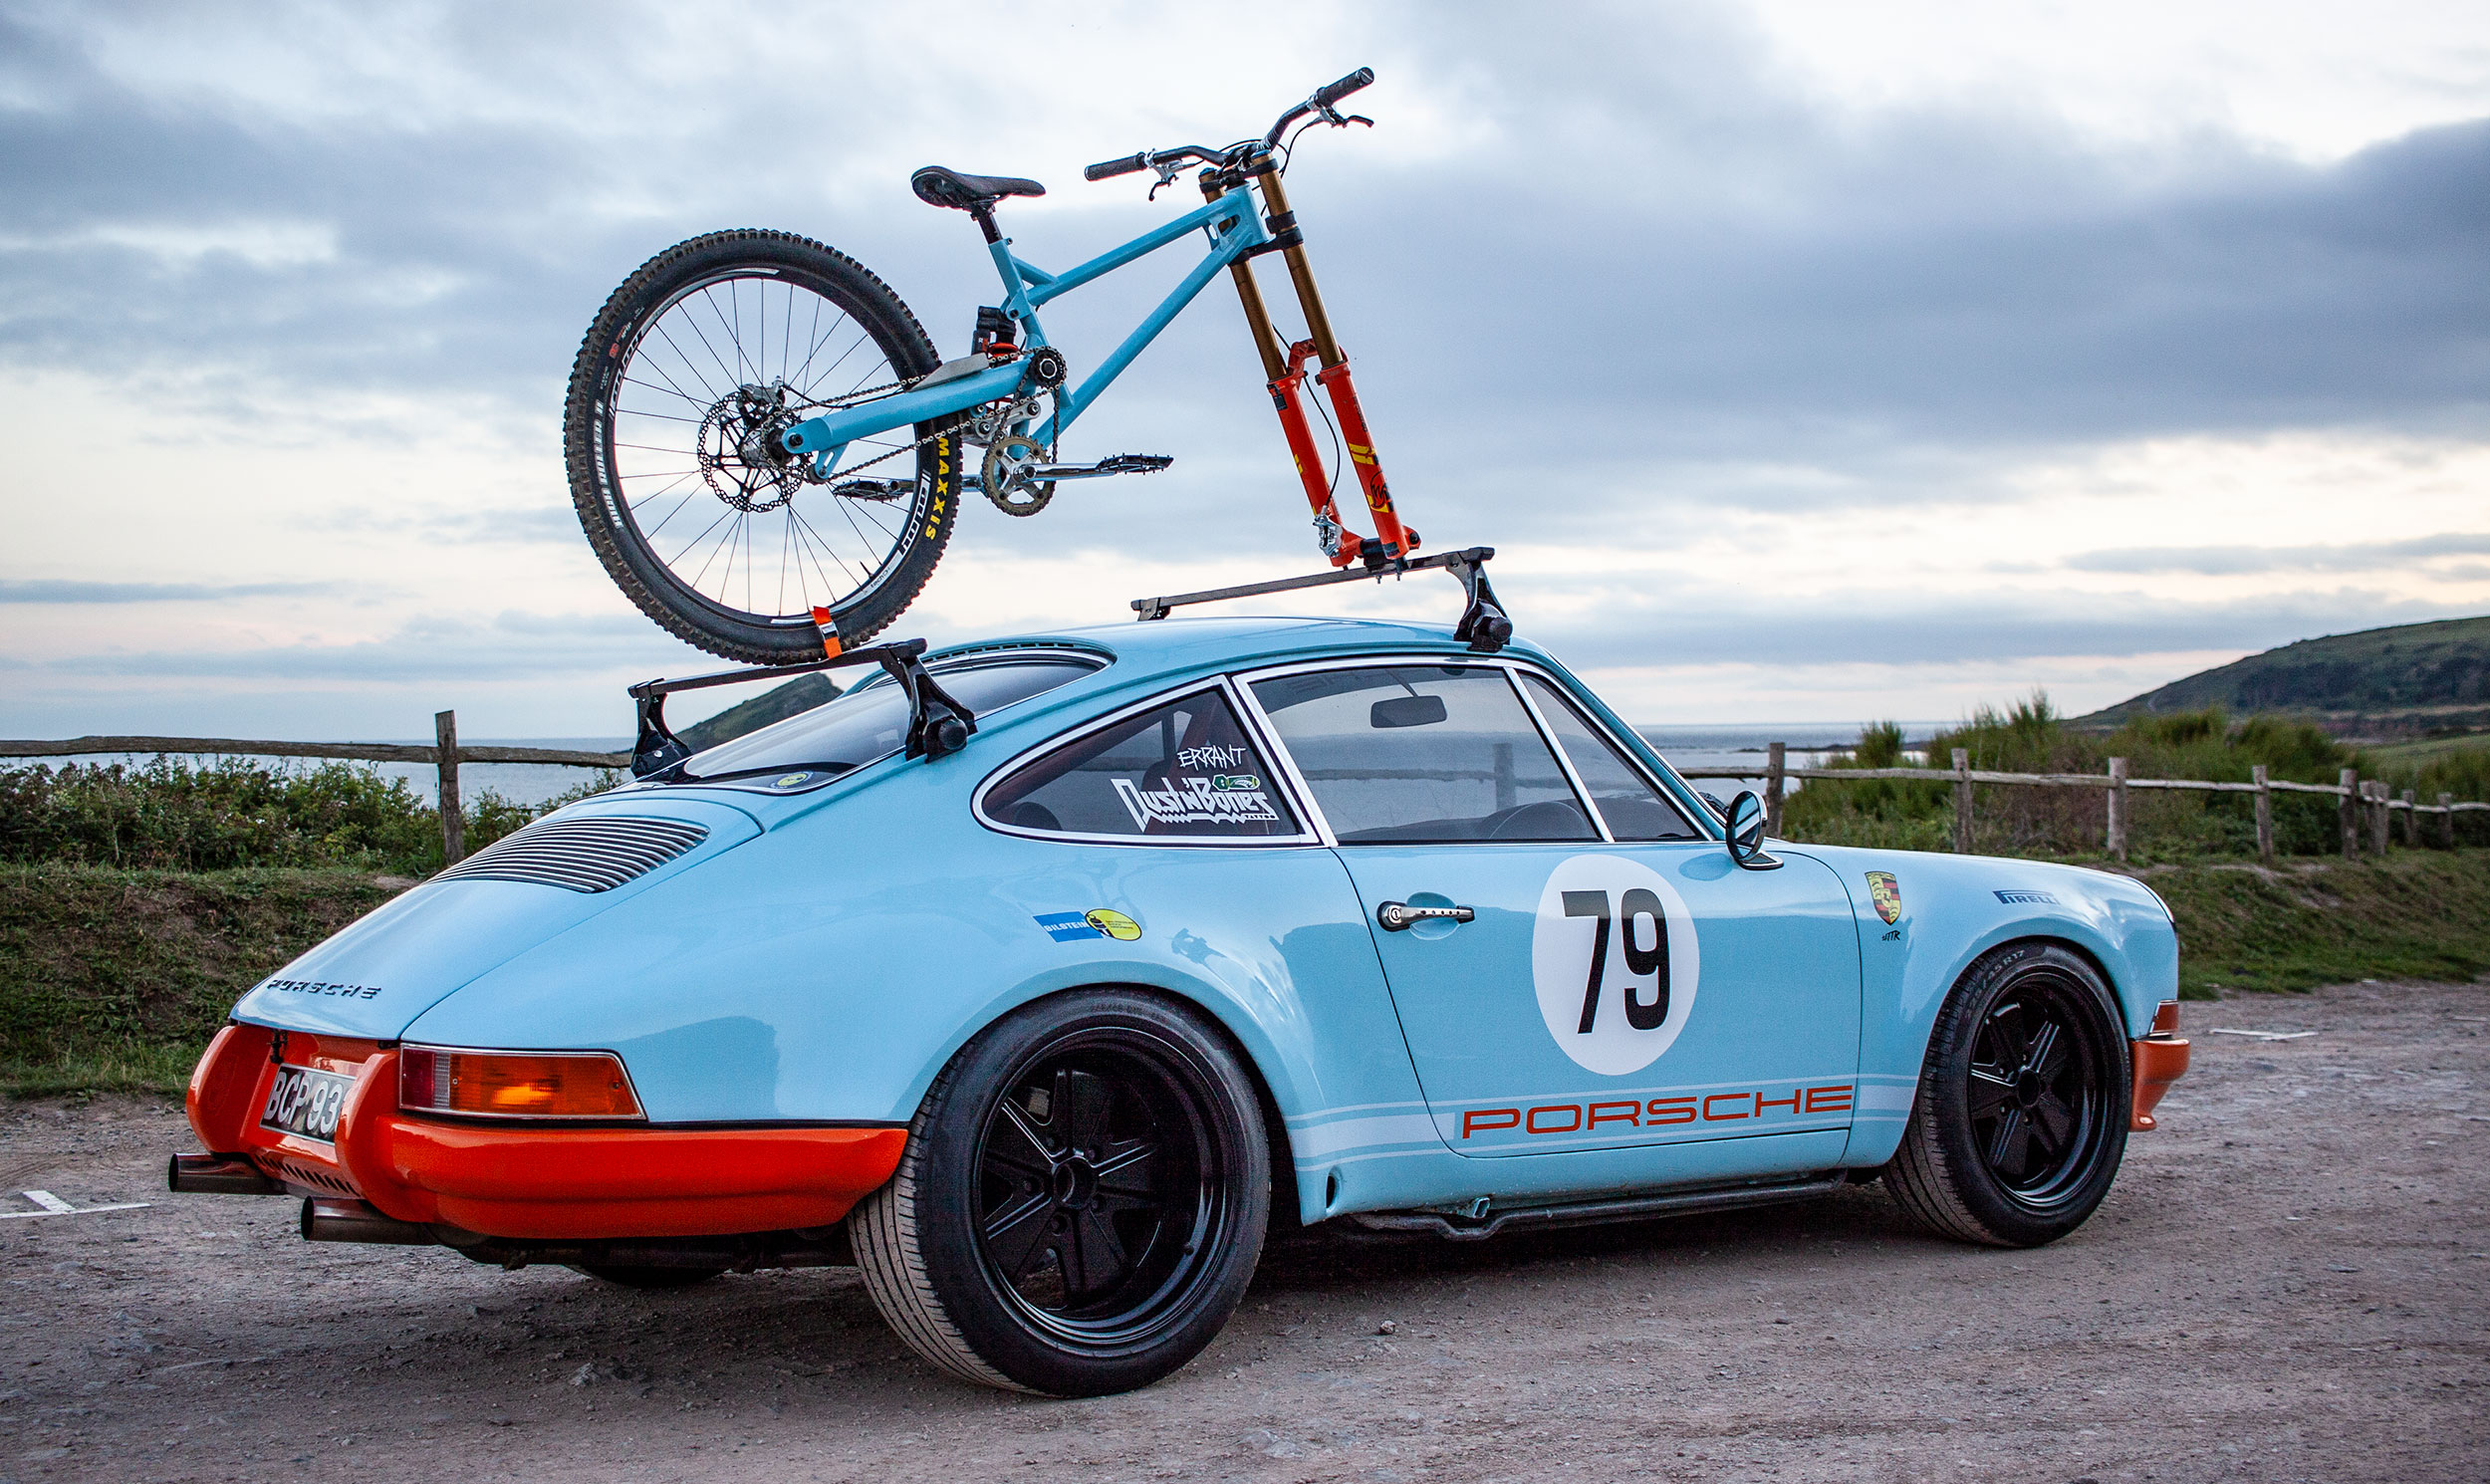 Porche-with-Tora-Bike-on-the-roof.jpeg